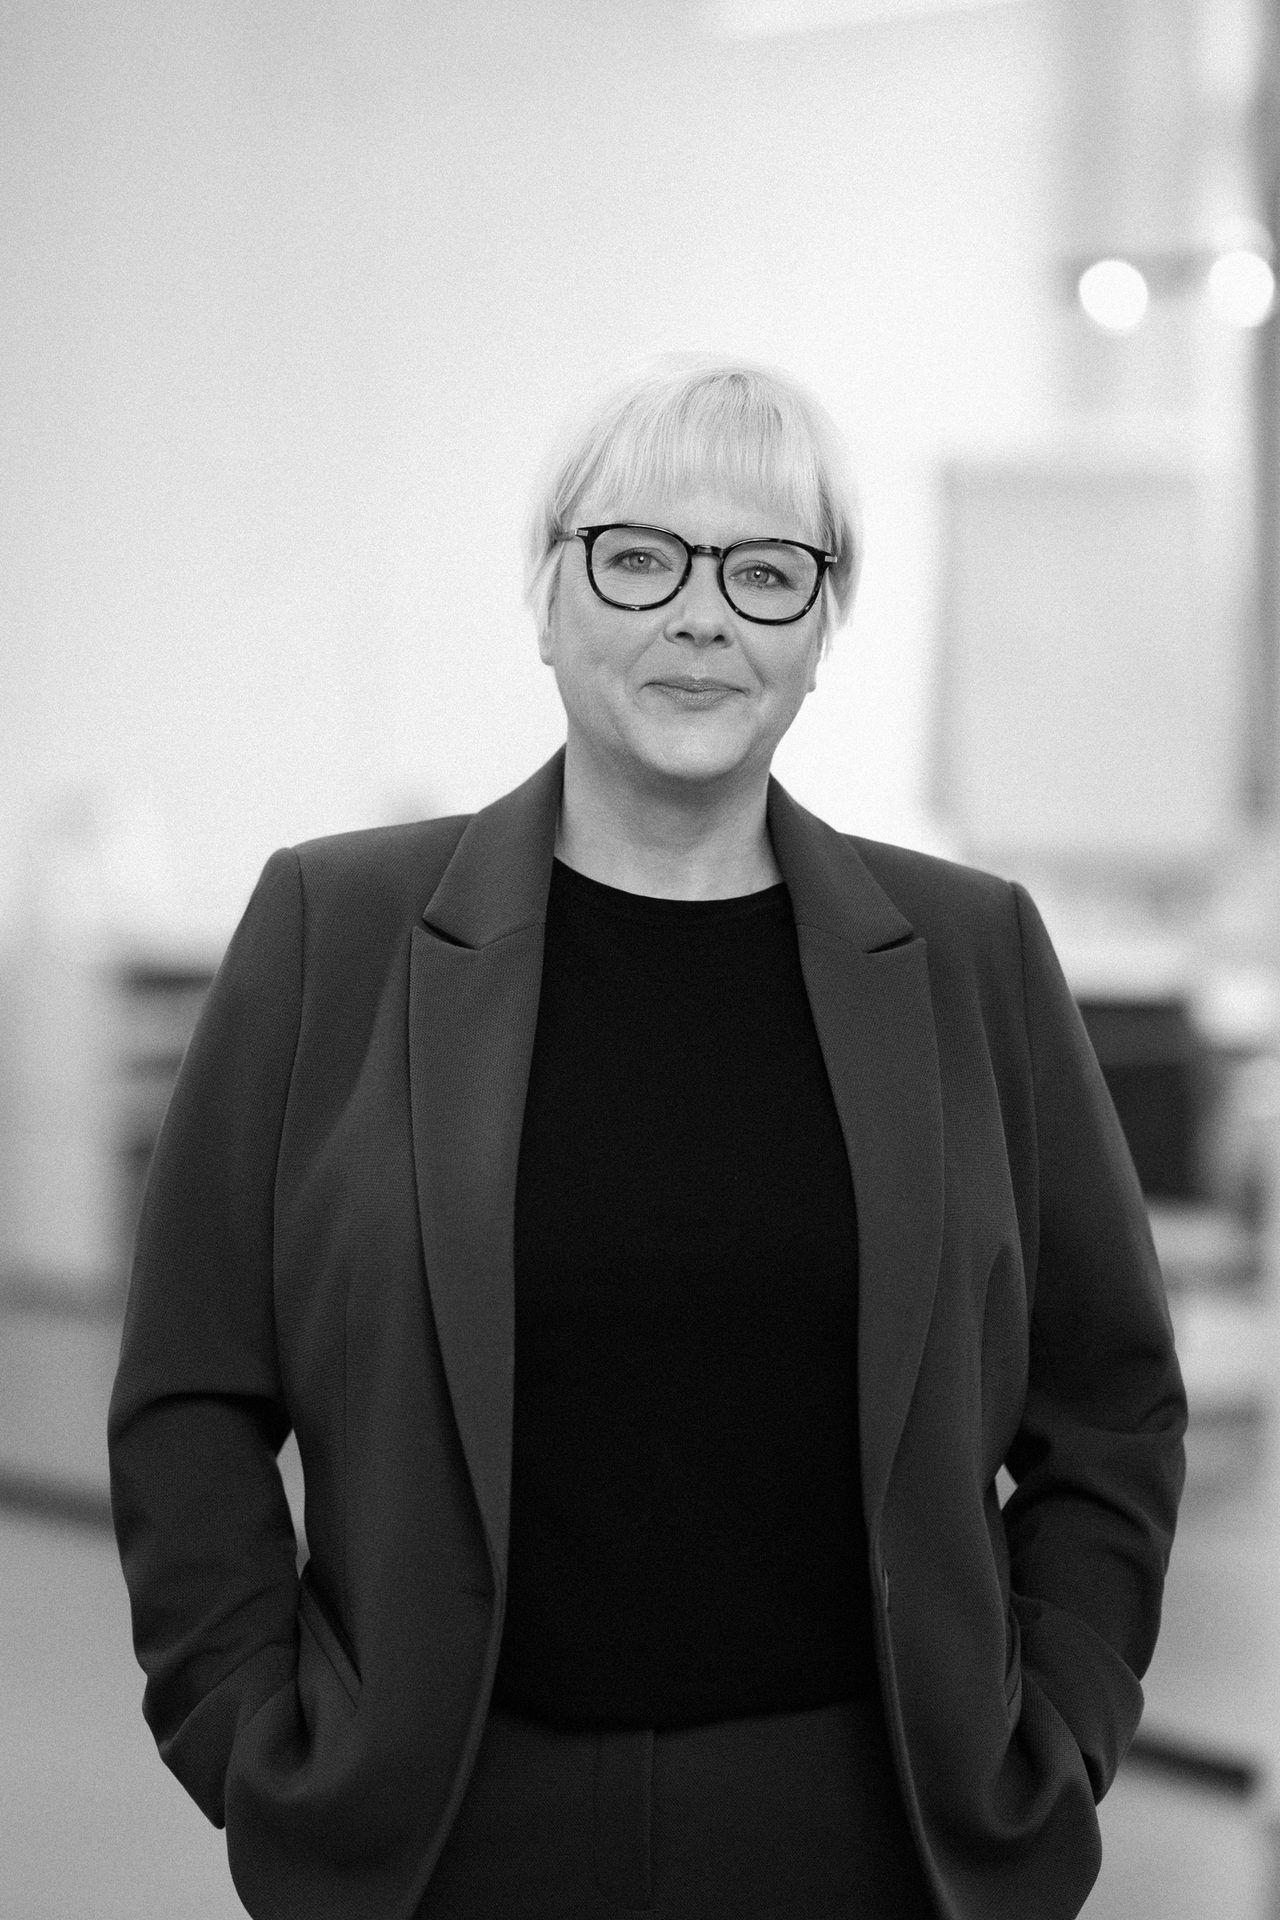 Yvonne Wodzak, Team Lead Martech, Flash photography, Glasses, Smile, Sleeve, Standing, Gesture, Black-and-white, Grey, Collar